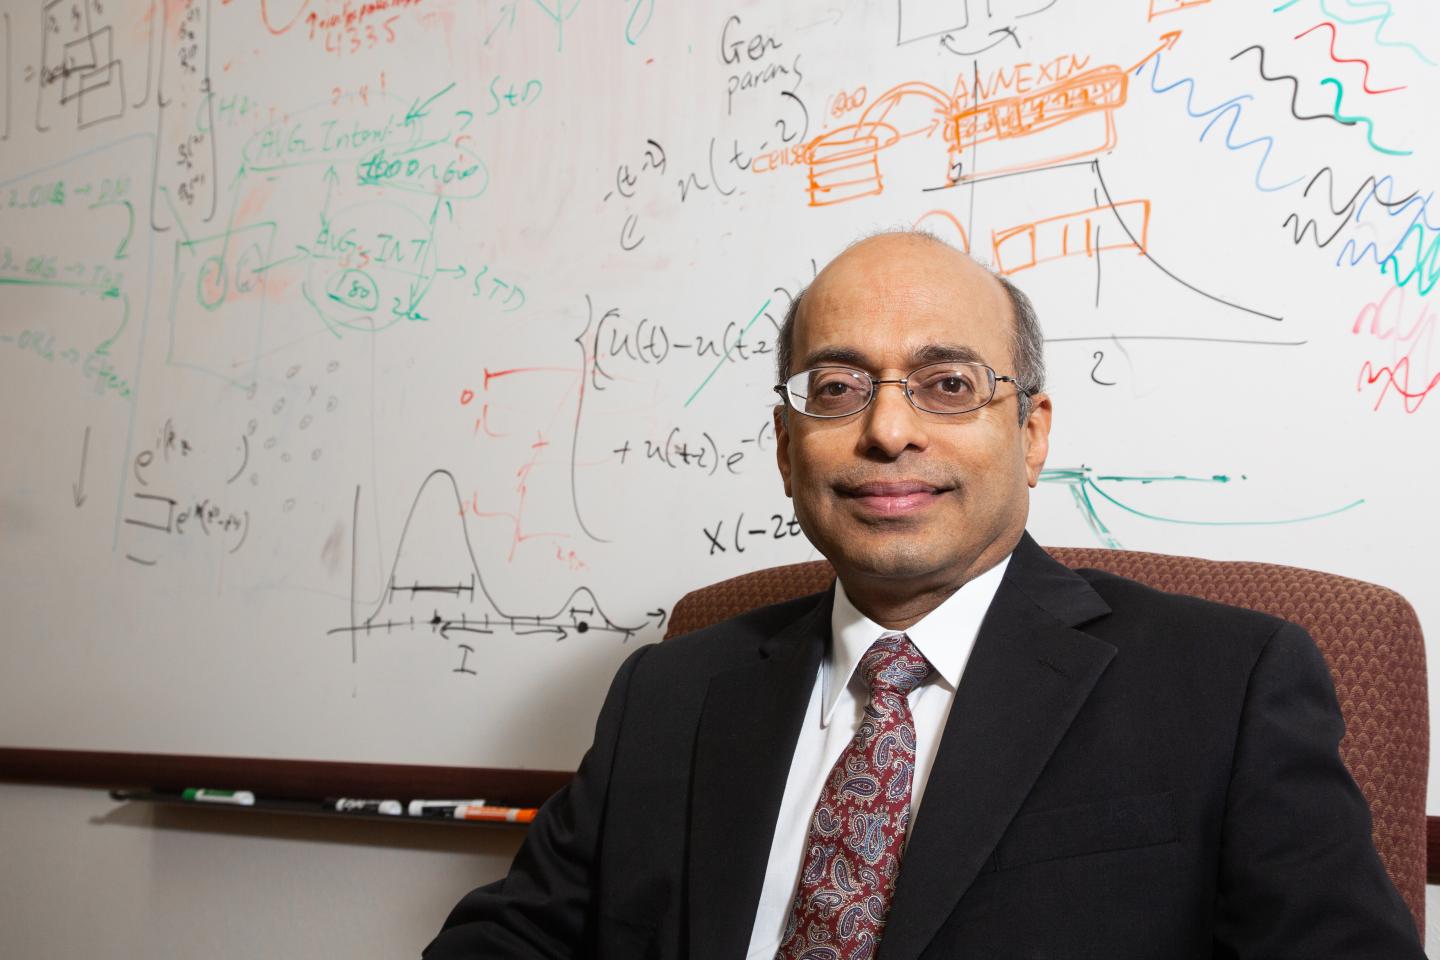 Badri Roysam, Chair of the University of Houston Department of Electrical and Computer Engineering